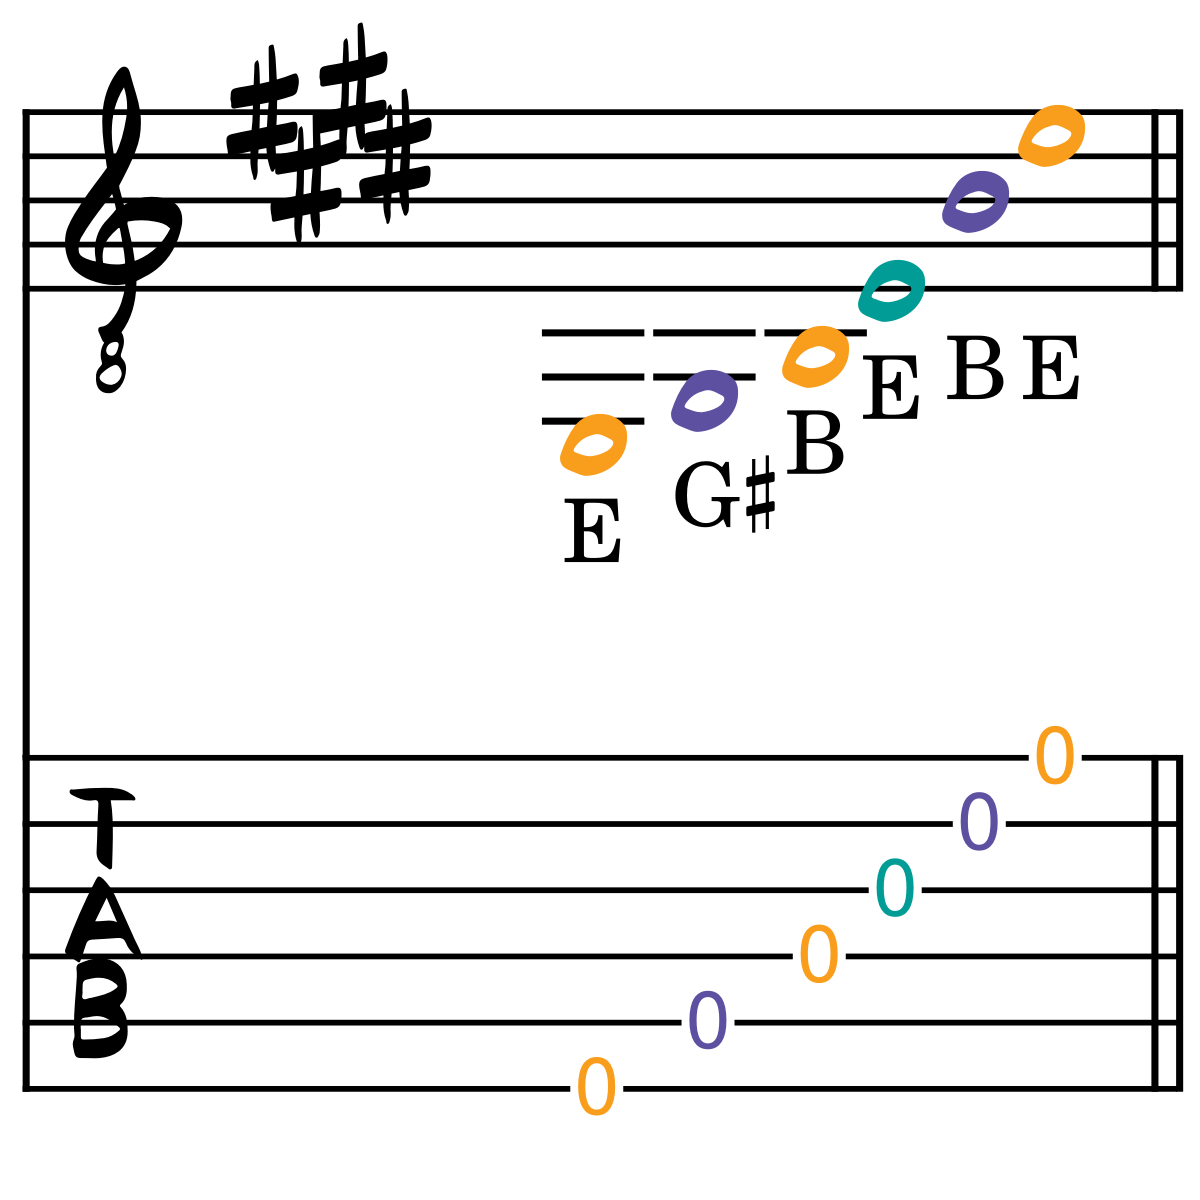 tablature for the Open Low E tuning